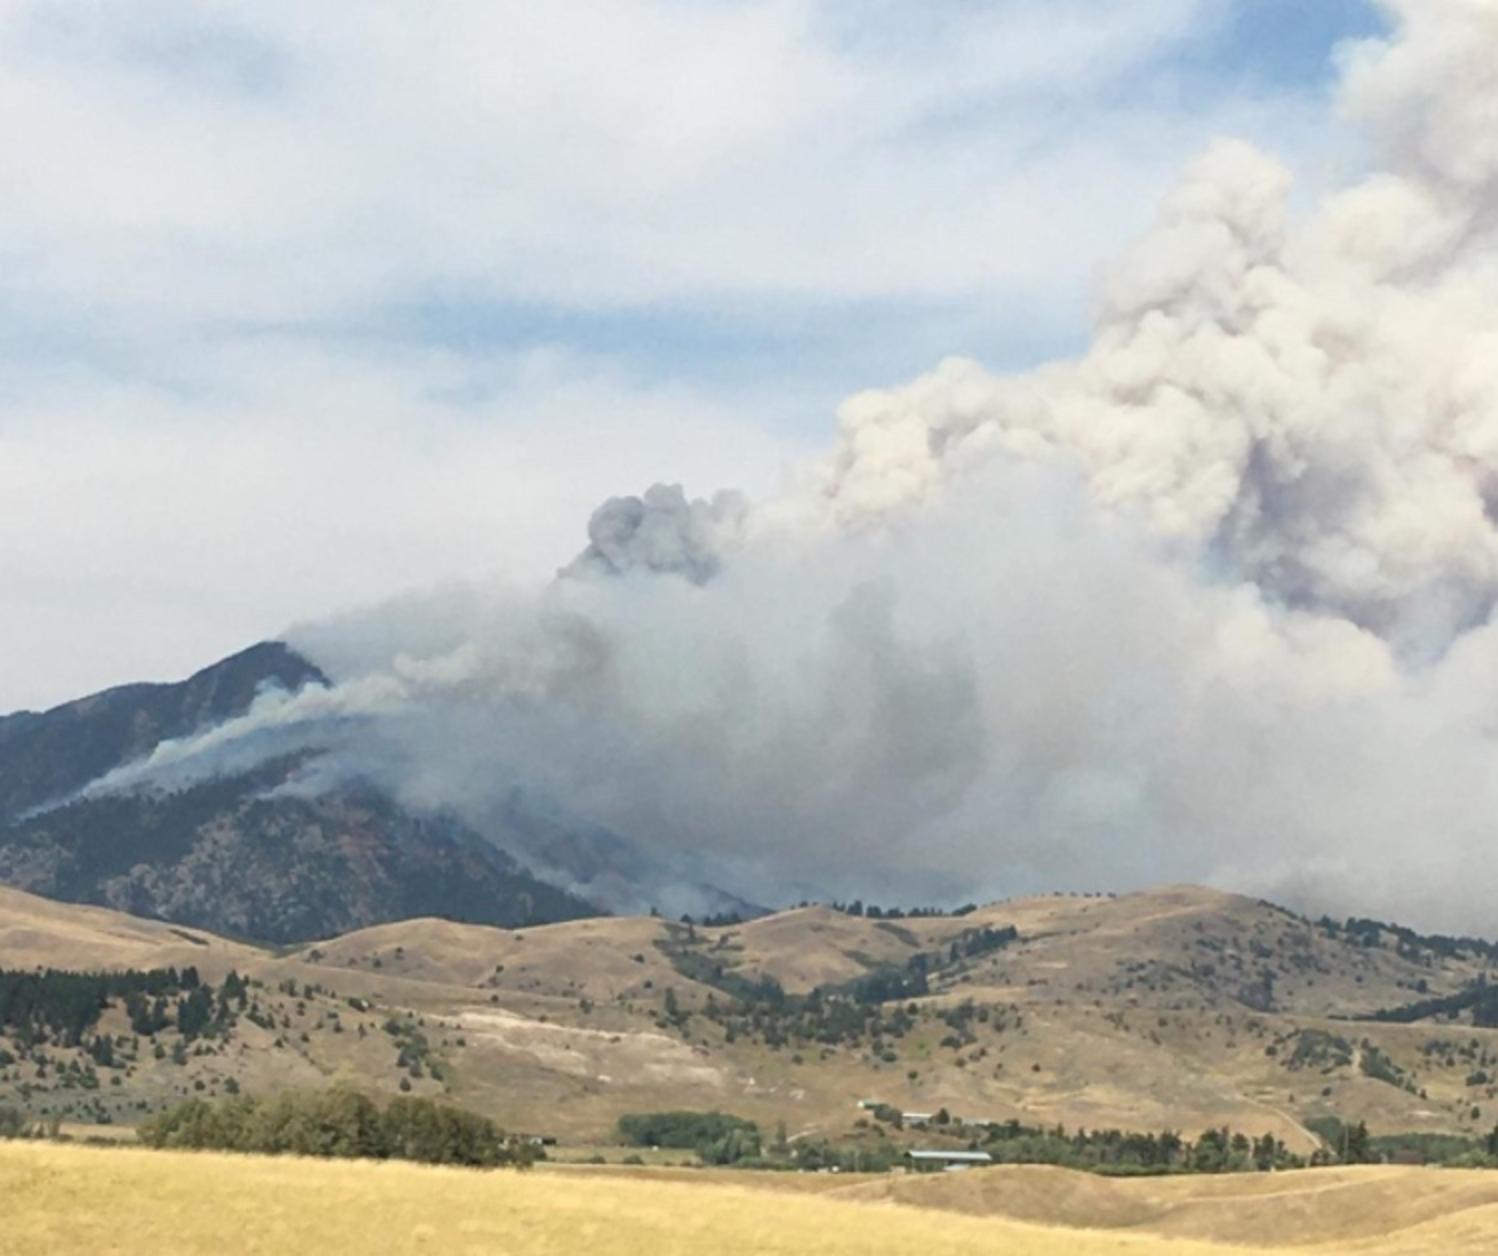 The Climate Change Human Health in Montana report, which came out earlier this year, describes the health hazards—both physical and mental—of smoke and particulate matter to Montanans. Here, the 2020 Bridger Foothills Fire that erupted Labor Day weekend near Bozeman. The blaze faced across the Bridgers and burned 68 structures, 30 of which were homes. Climate change already is increasing wildfire risk for people living in forested exurban areas also known as the wildland-urban interface across the West. Photo courtesy Bruce Maxwell.  